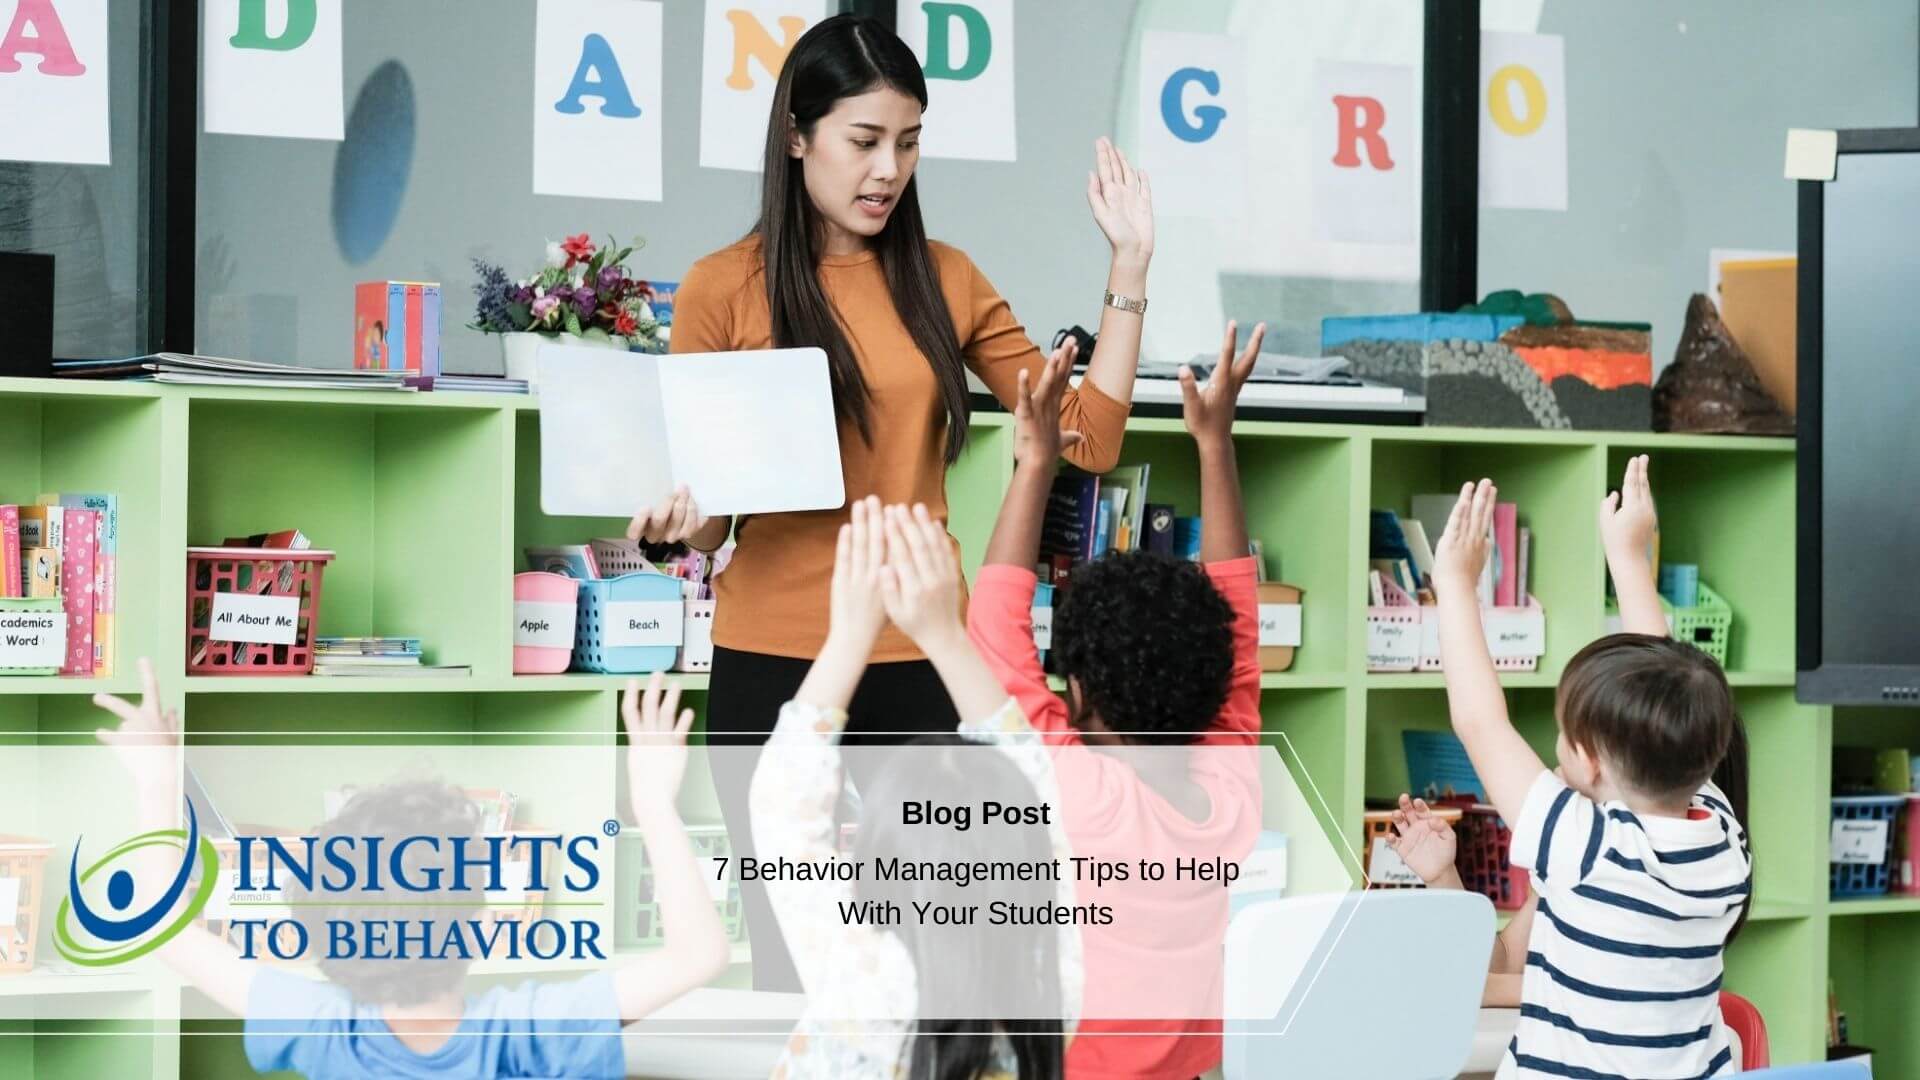 Insights to behavior blog post image template (2)